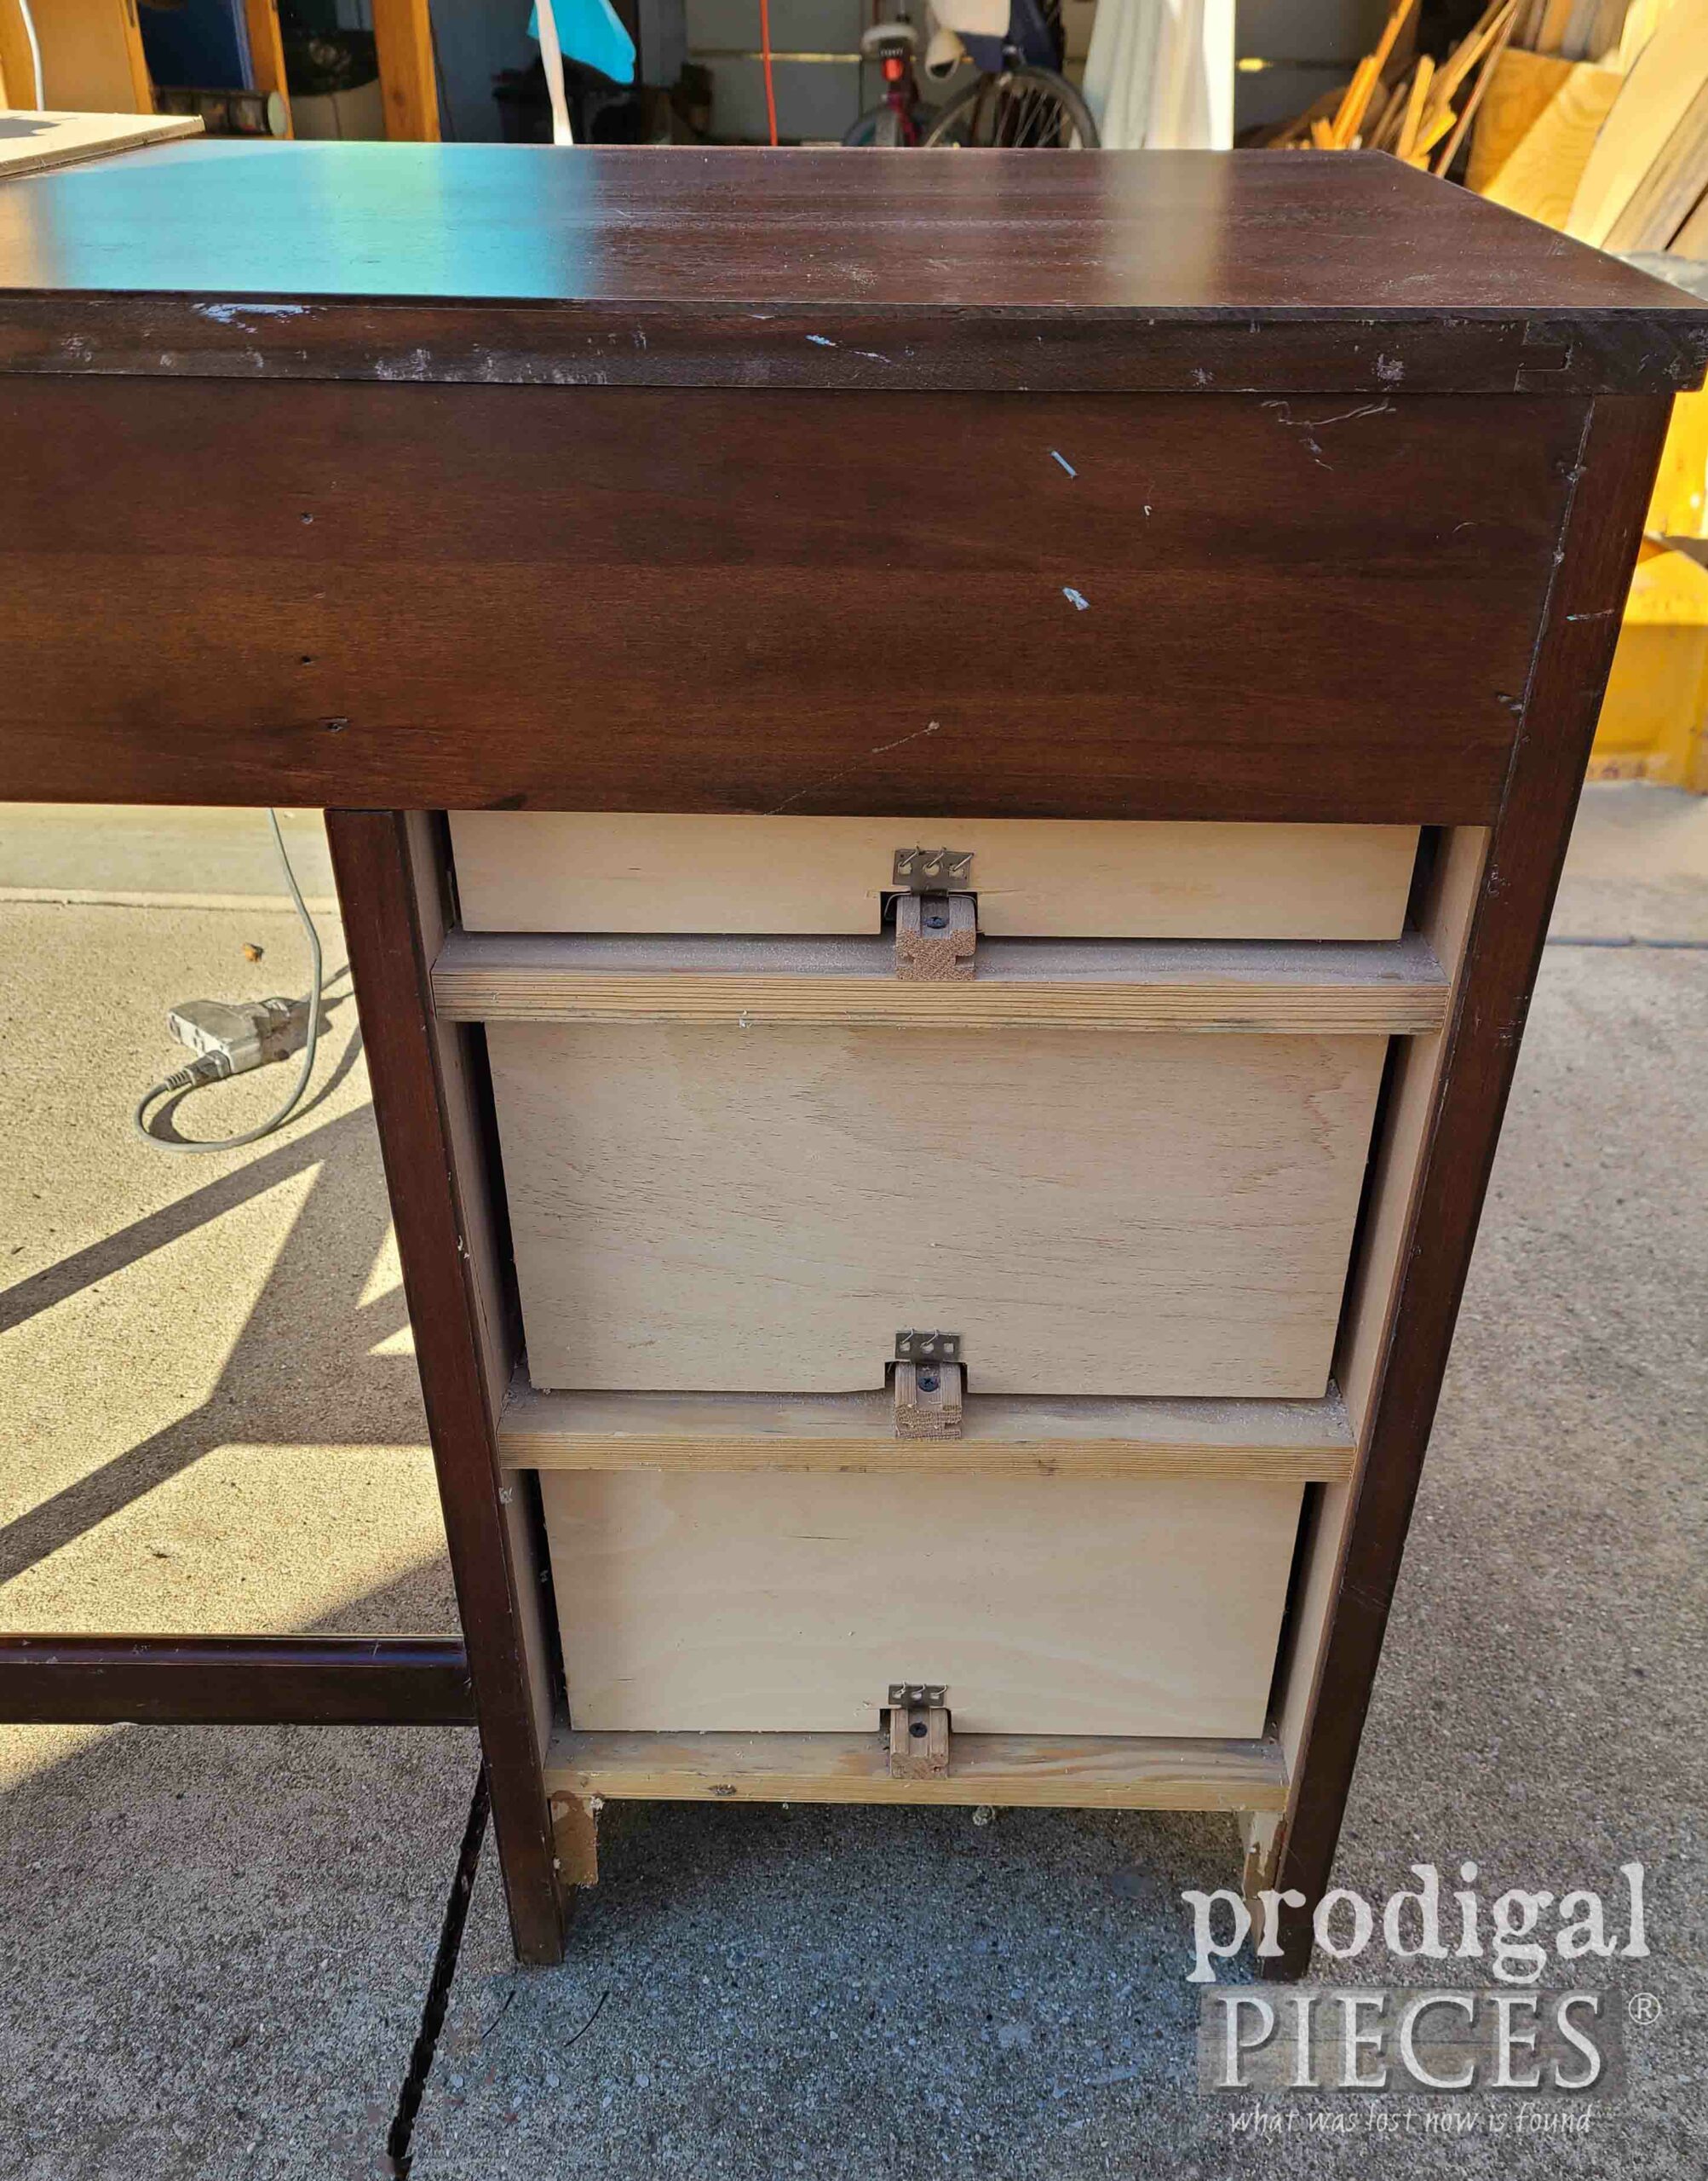 Missing Back of Thrifted Desk Makeover | prodigalpieces.com #prodigalpieces